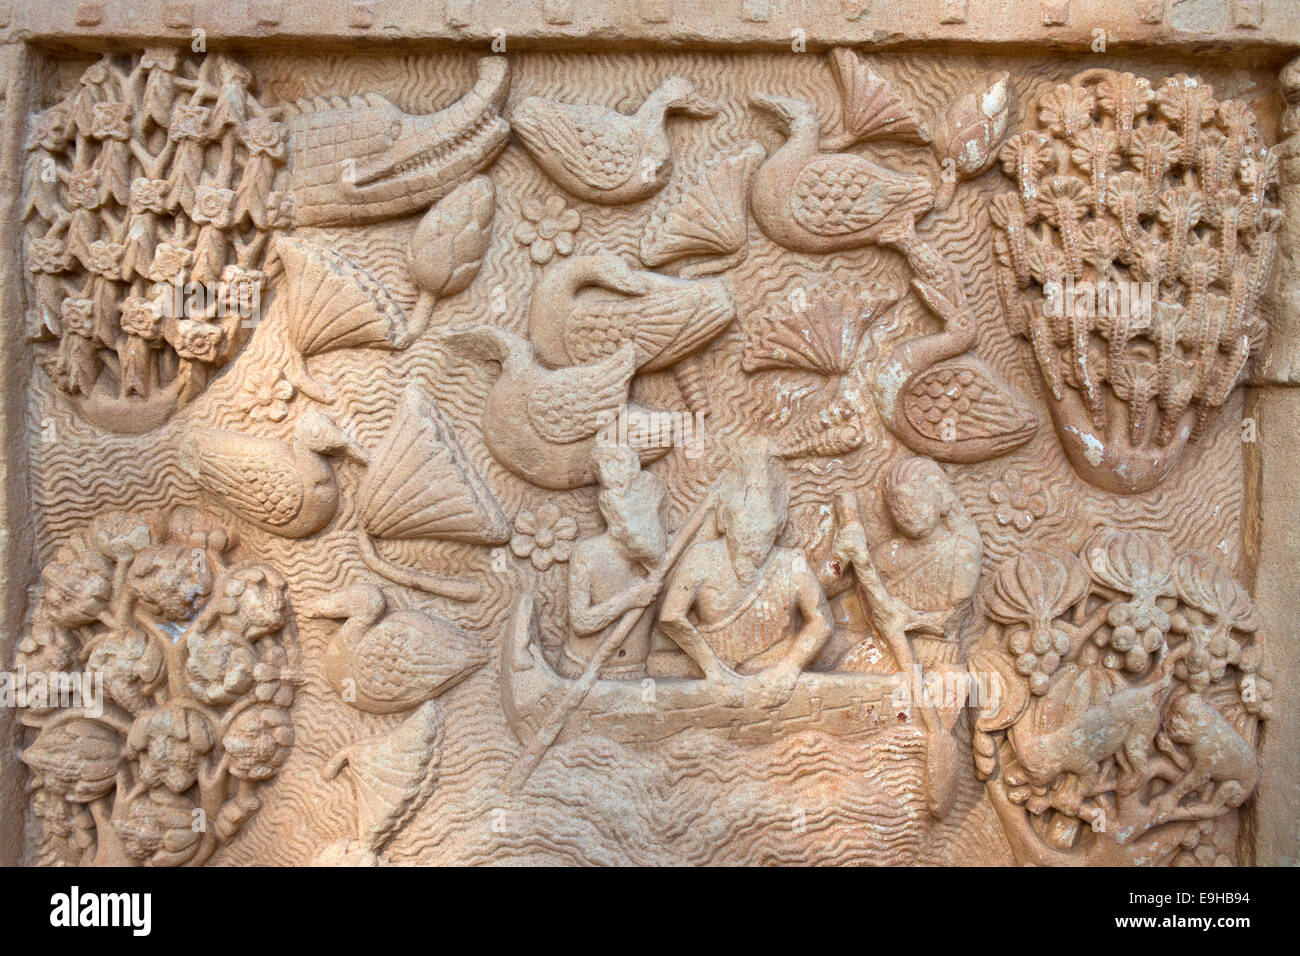 Frieze, relief, depicting birds and scenes from the life of Buddha, Mauryan dynasty, Stupa of Sanchi, UNESCO World Heritage Site Stock Photo